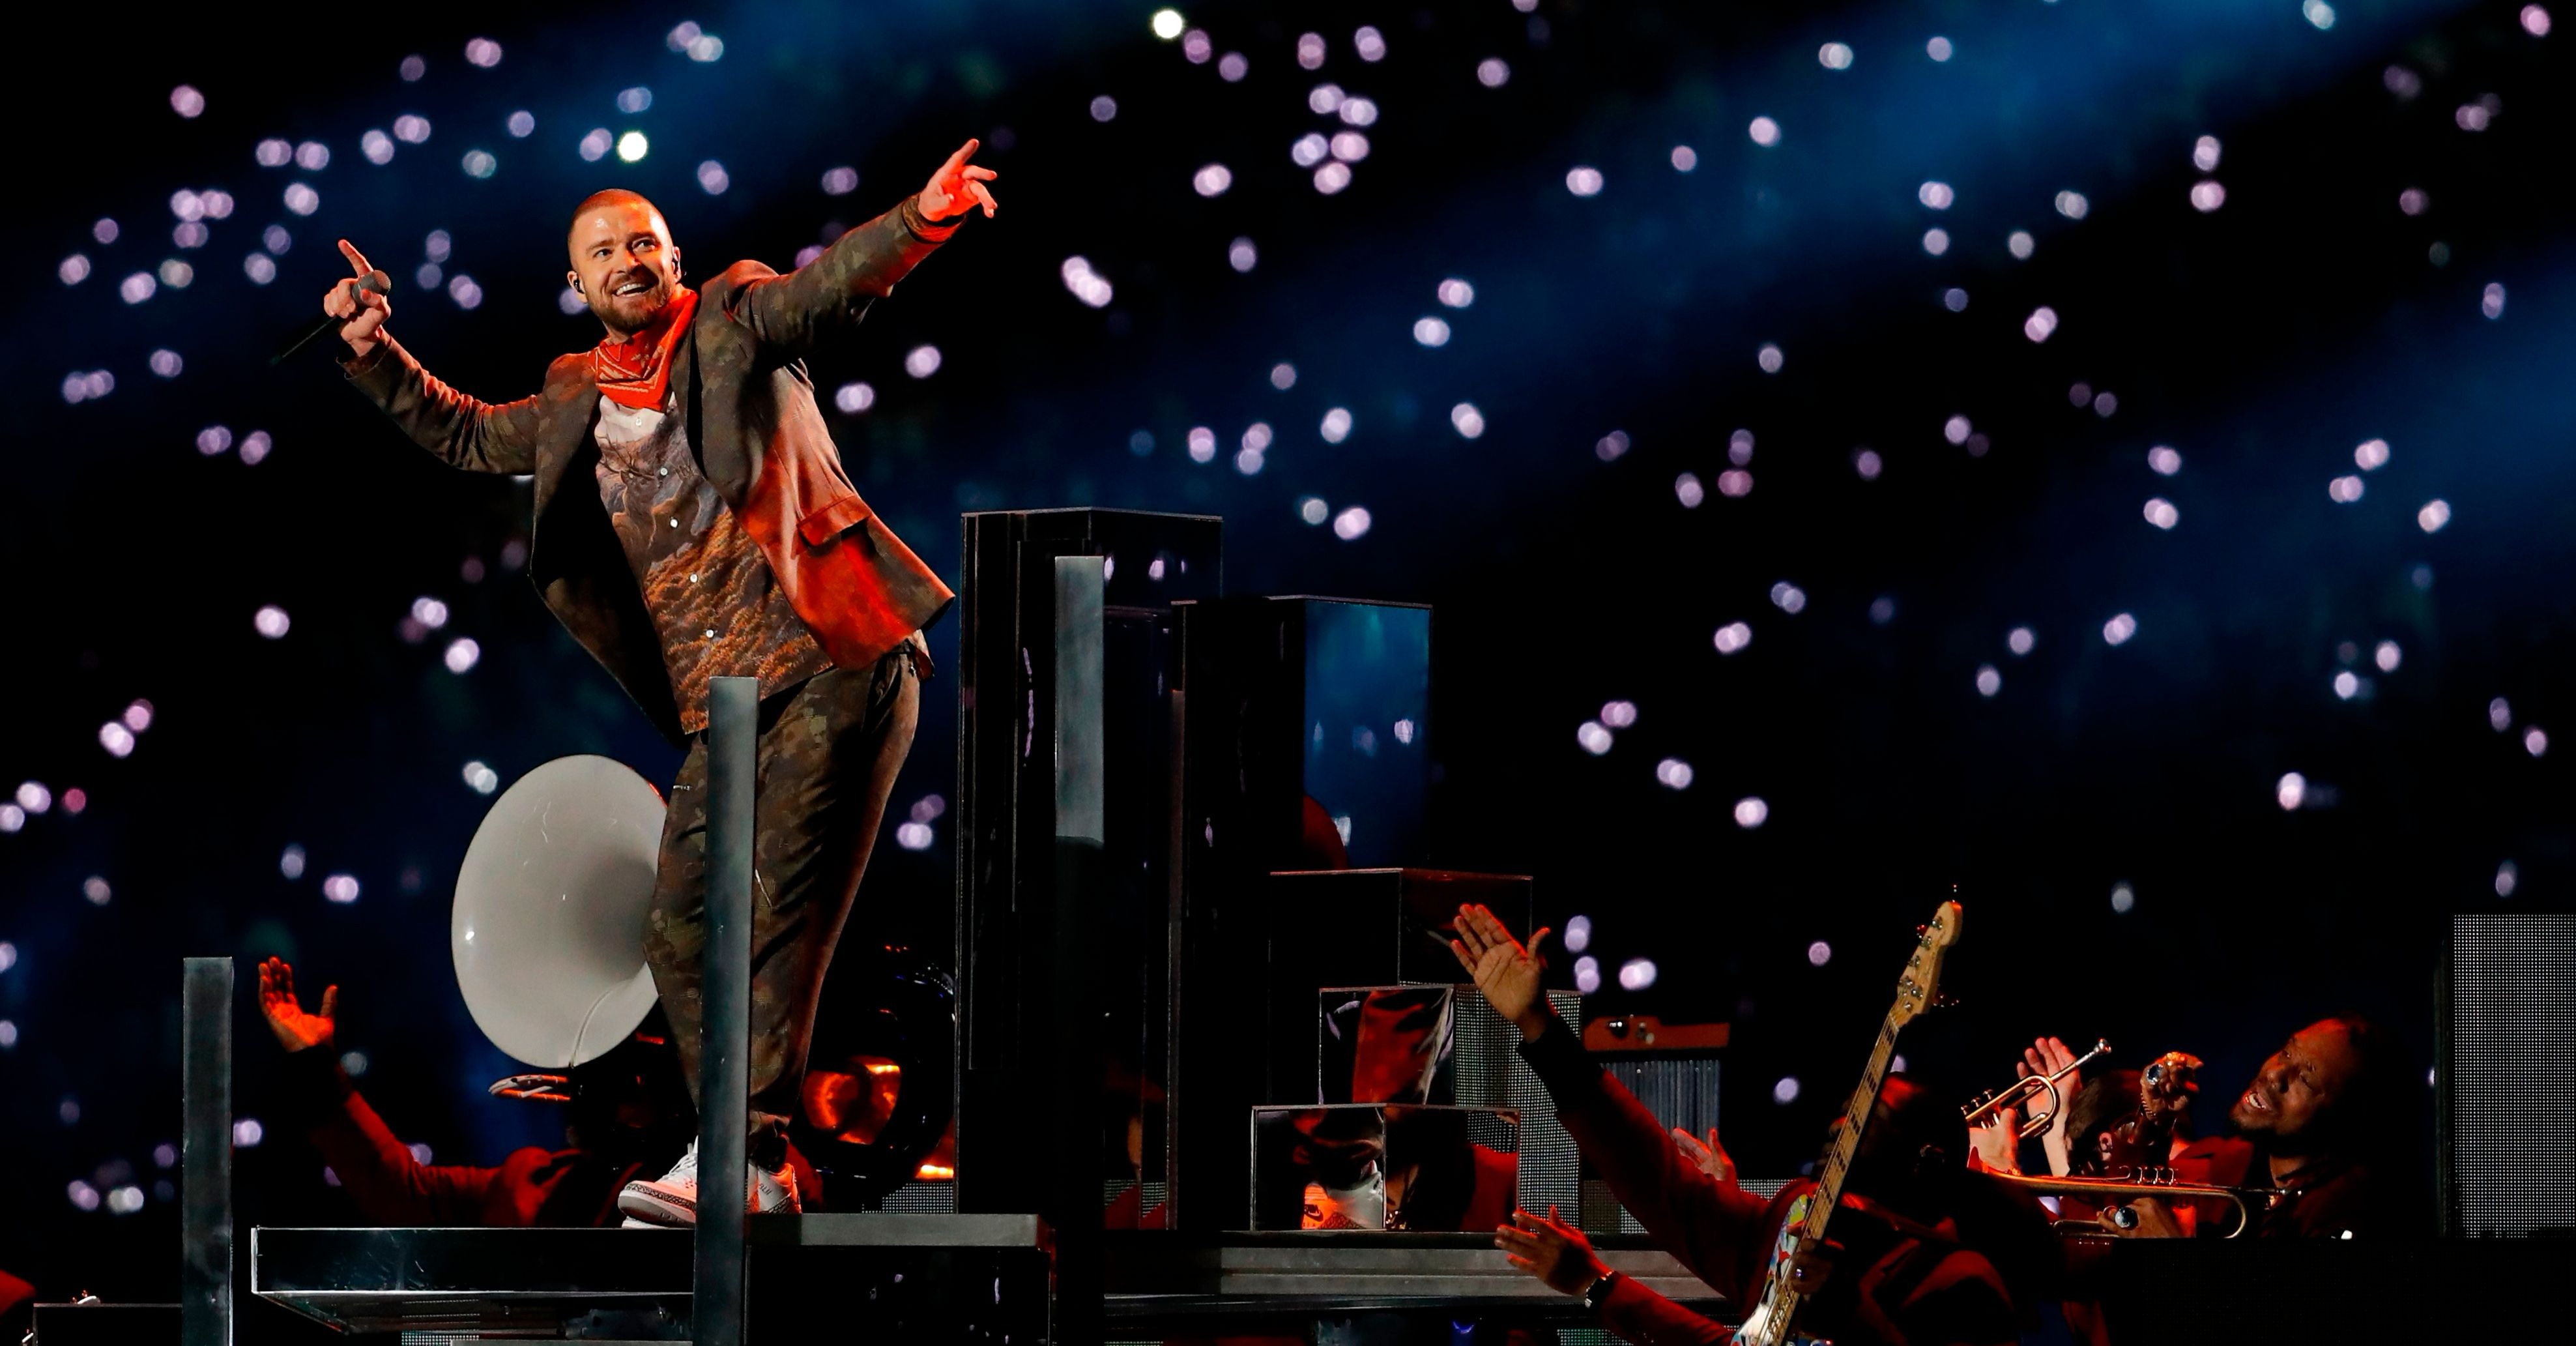 Justin Timberlake performs during halftime at the NFL Super Bowl 52